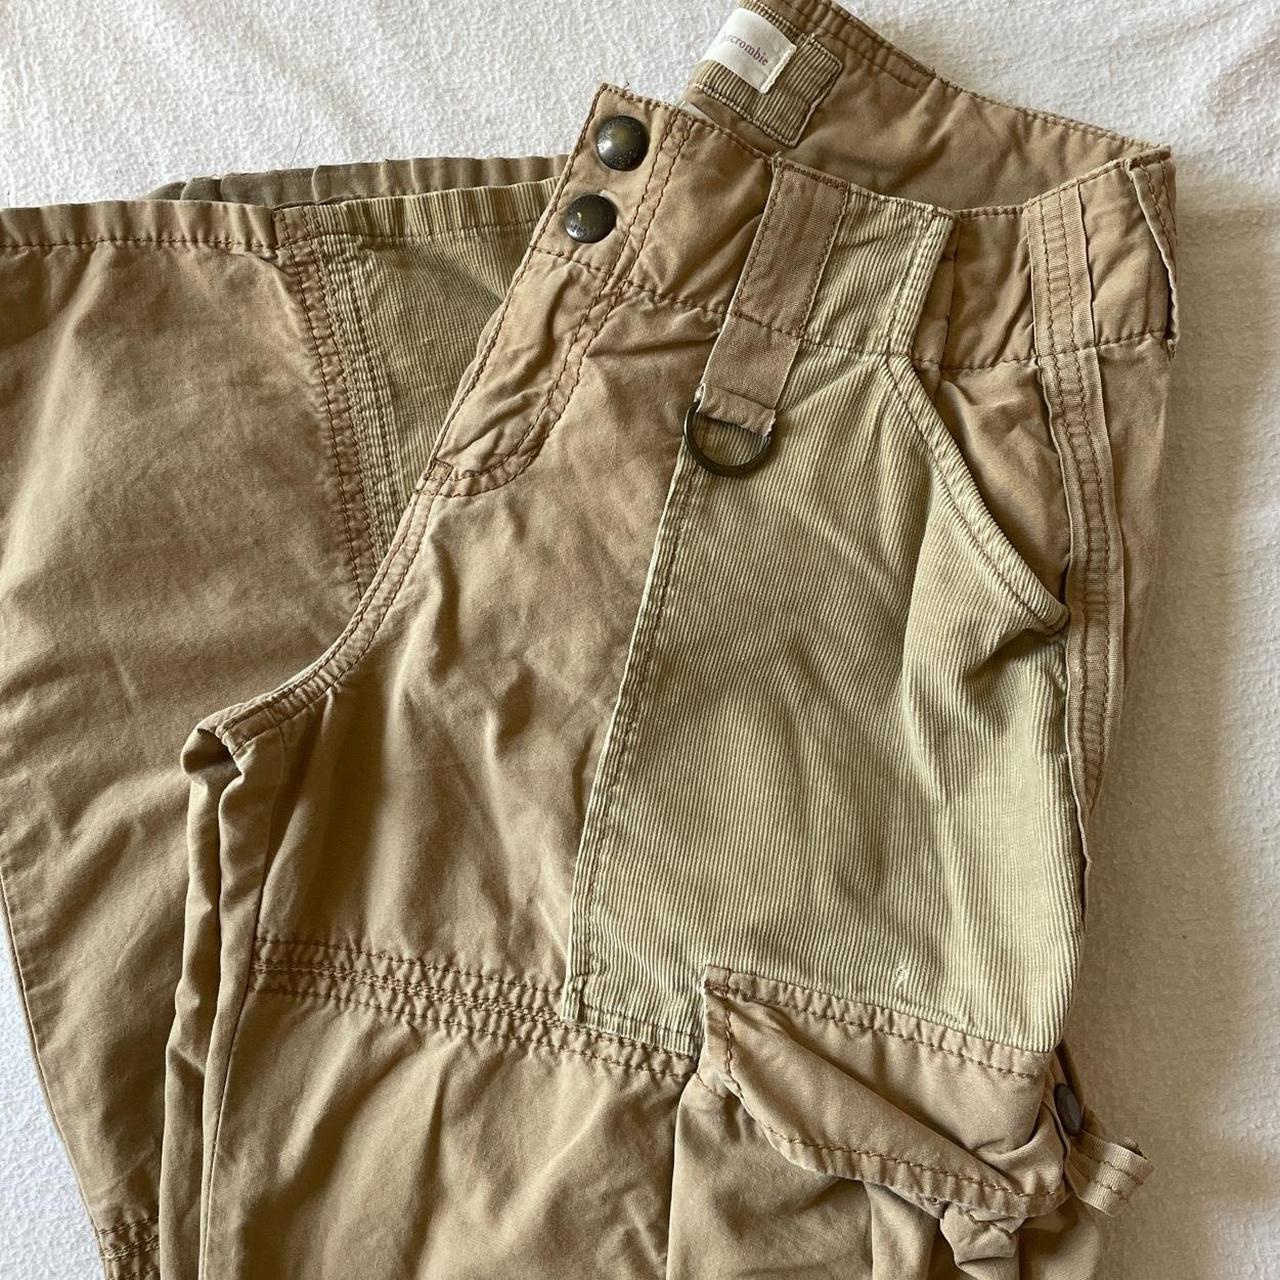 Abercrombie & Fitch Women's Tan and Cream Trousers | Depop